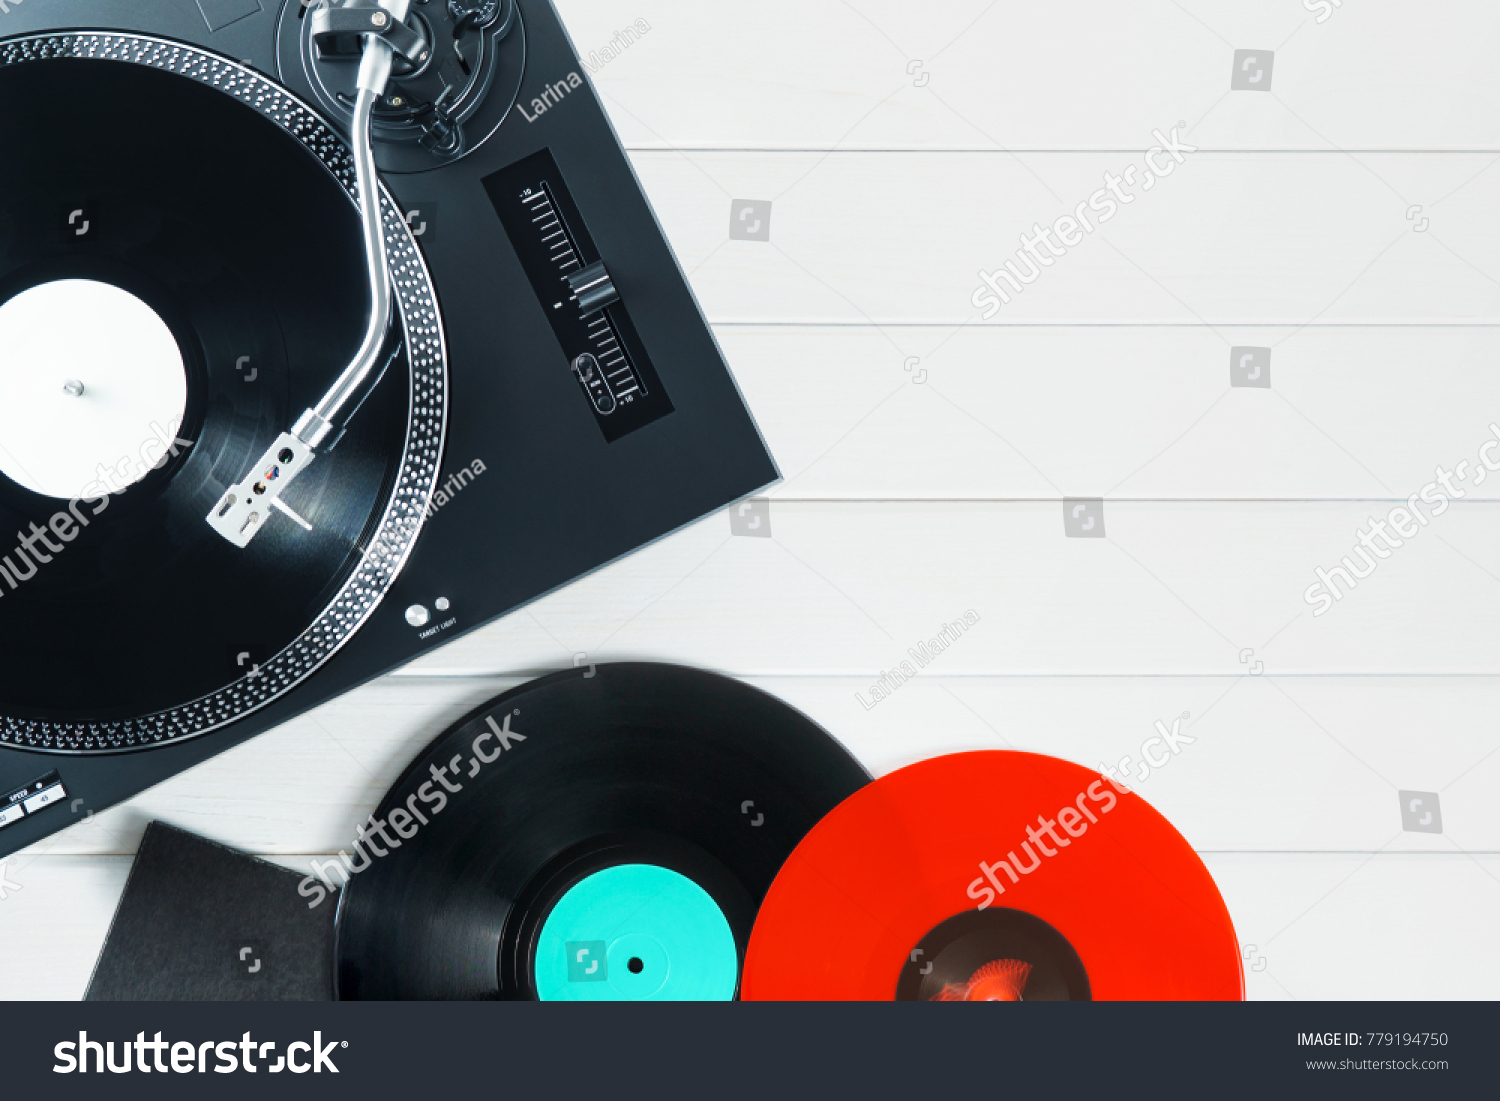 Turntable vinyl record player  with vinyl records and headphones on a wooden table. Sound technology for DJ to mix & play music. Black vinyl record. Vinyl record player     #779194750